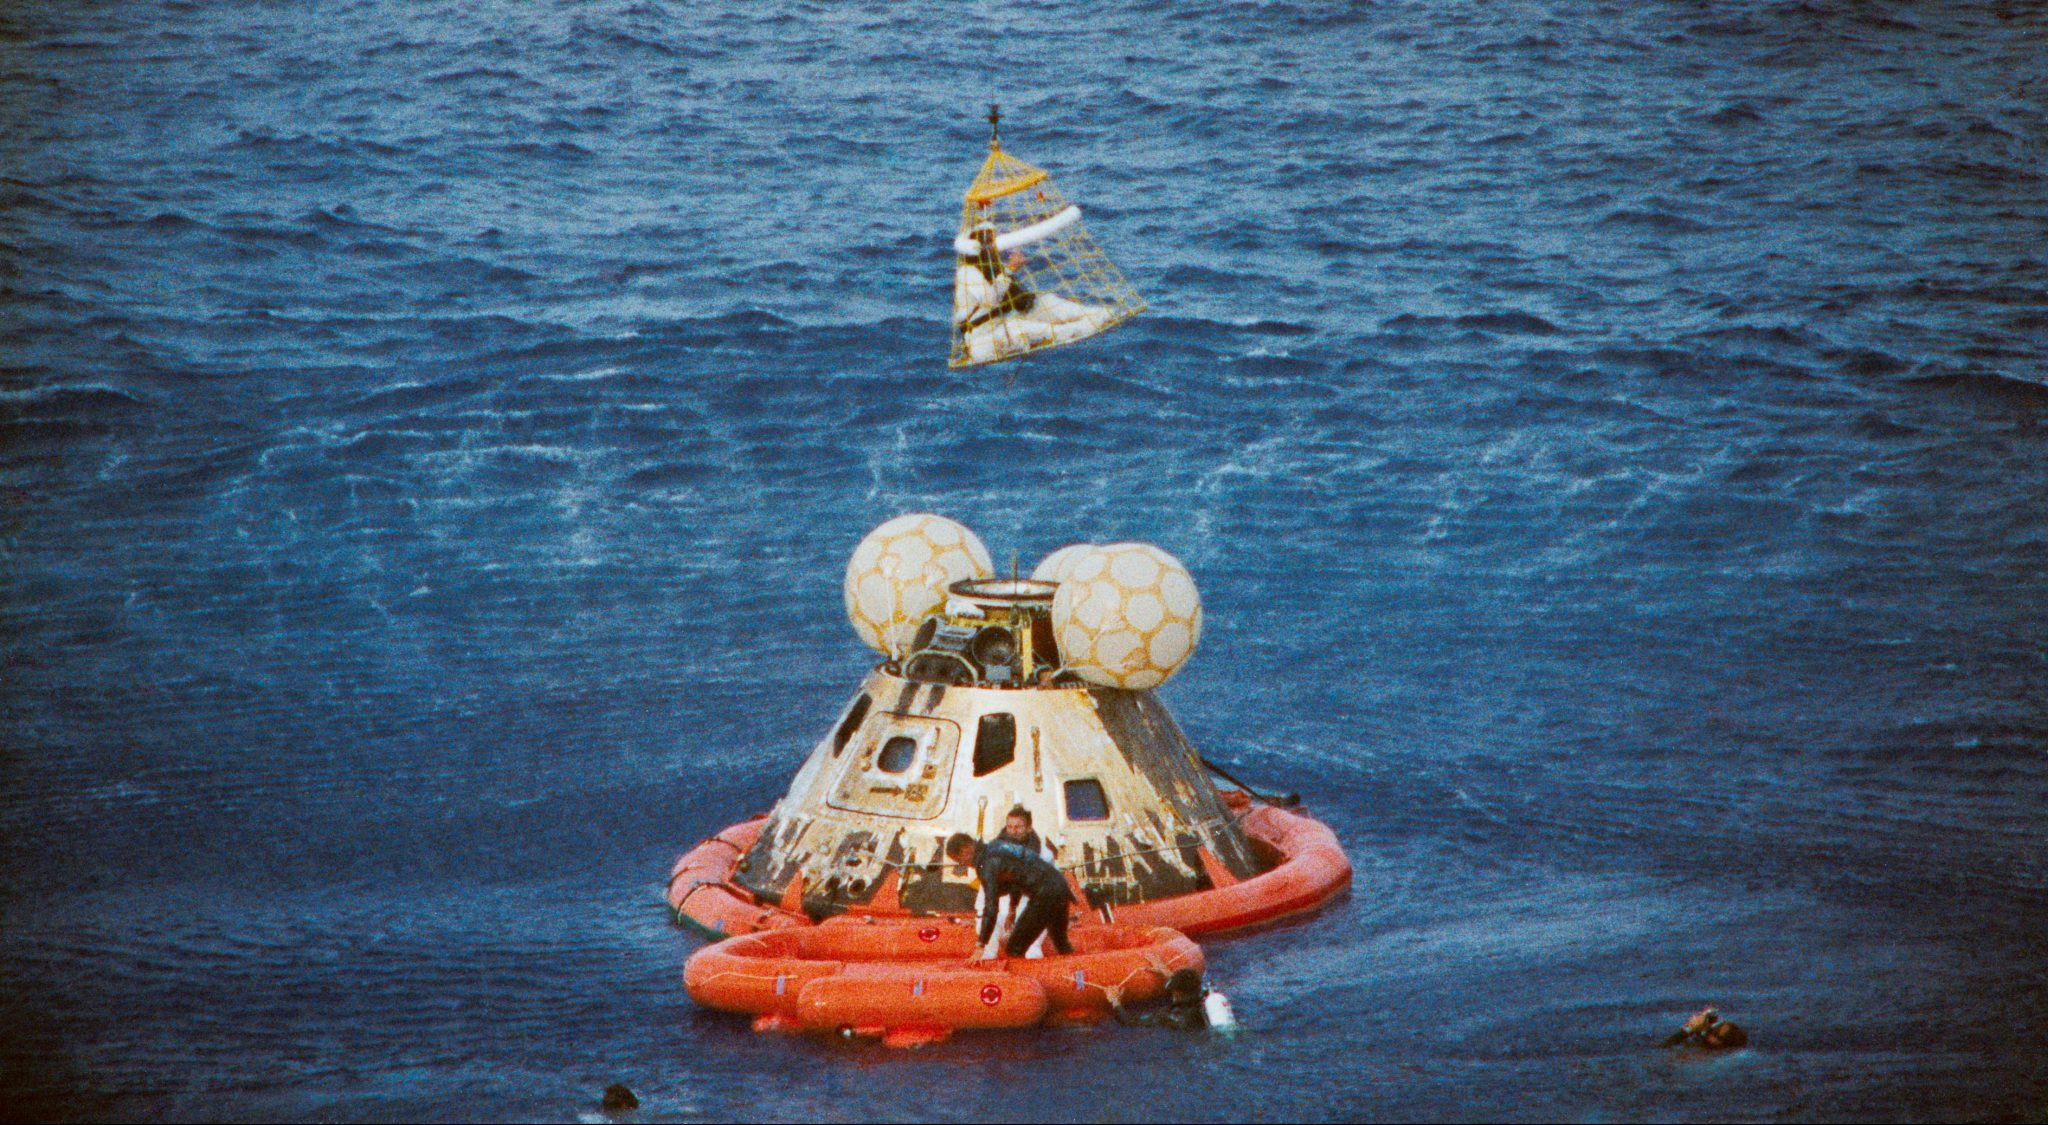 Apollo capsule floating in ocean with recovery team.